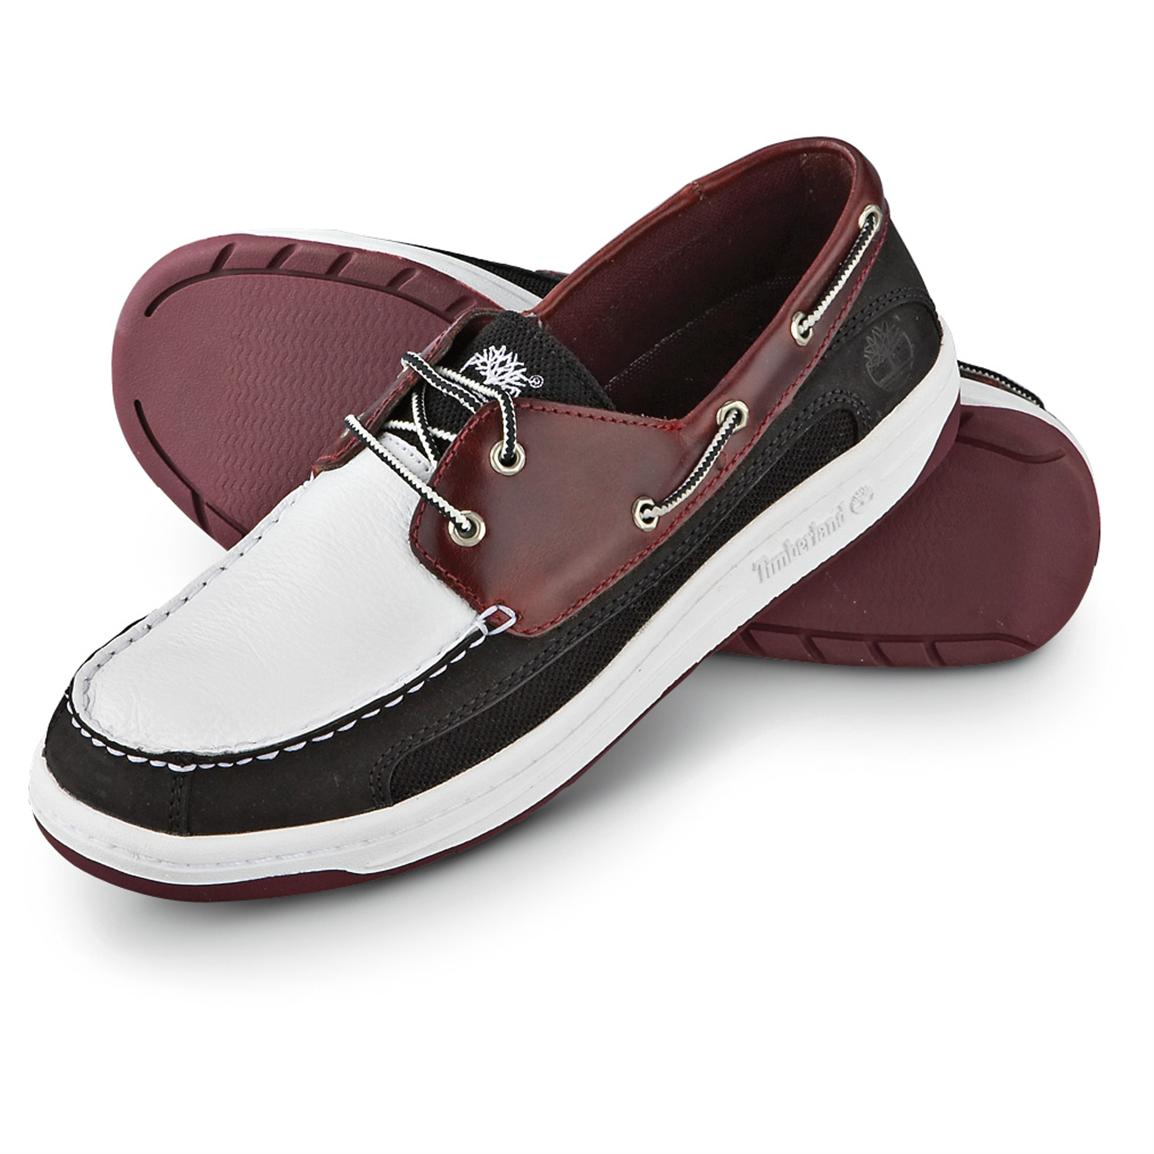 mens white boat shoes